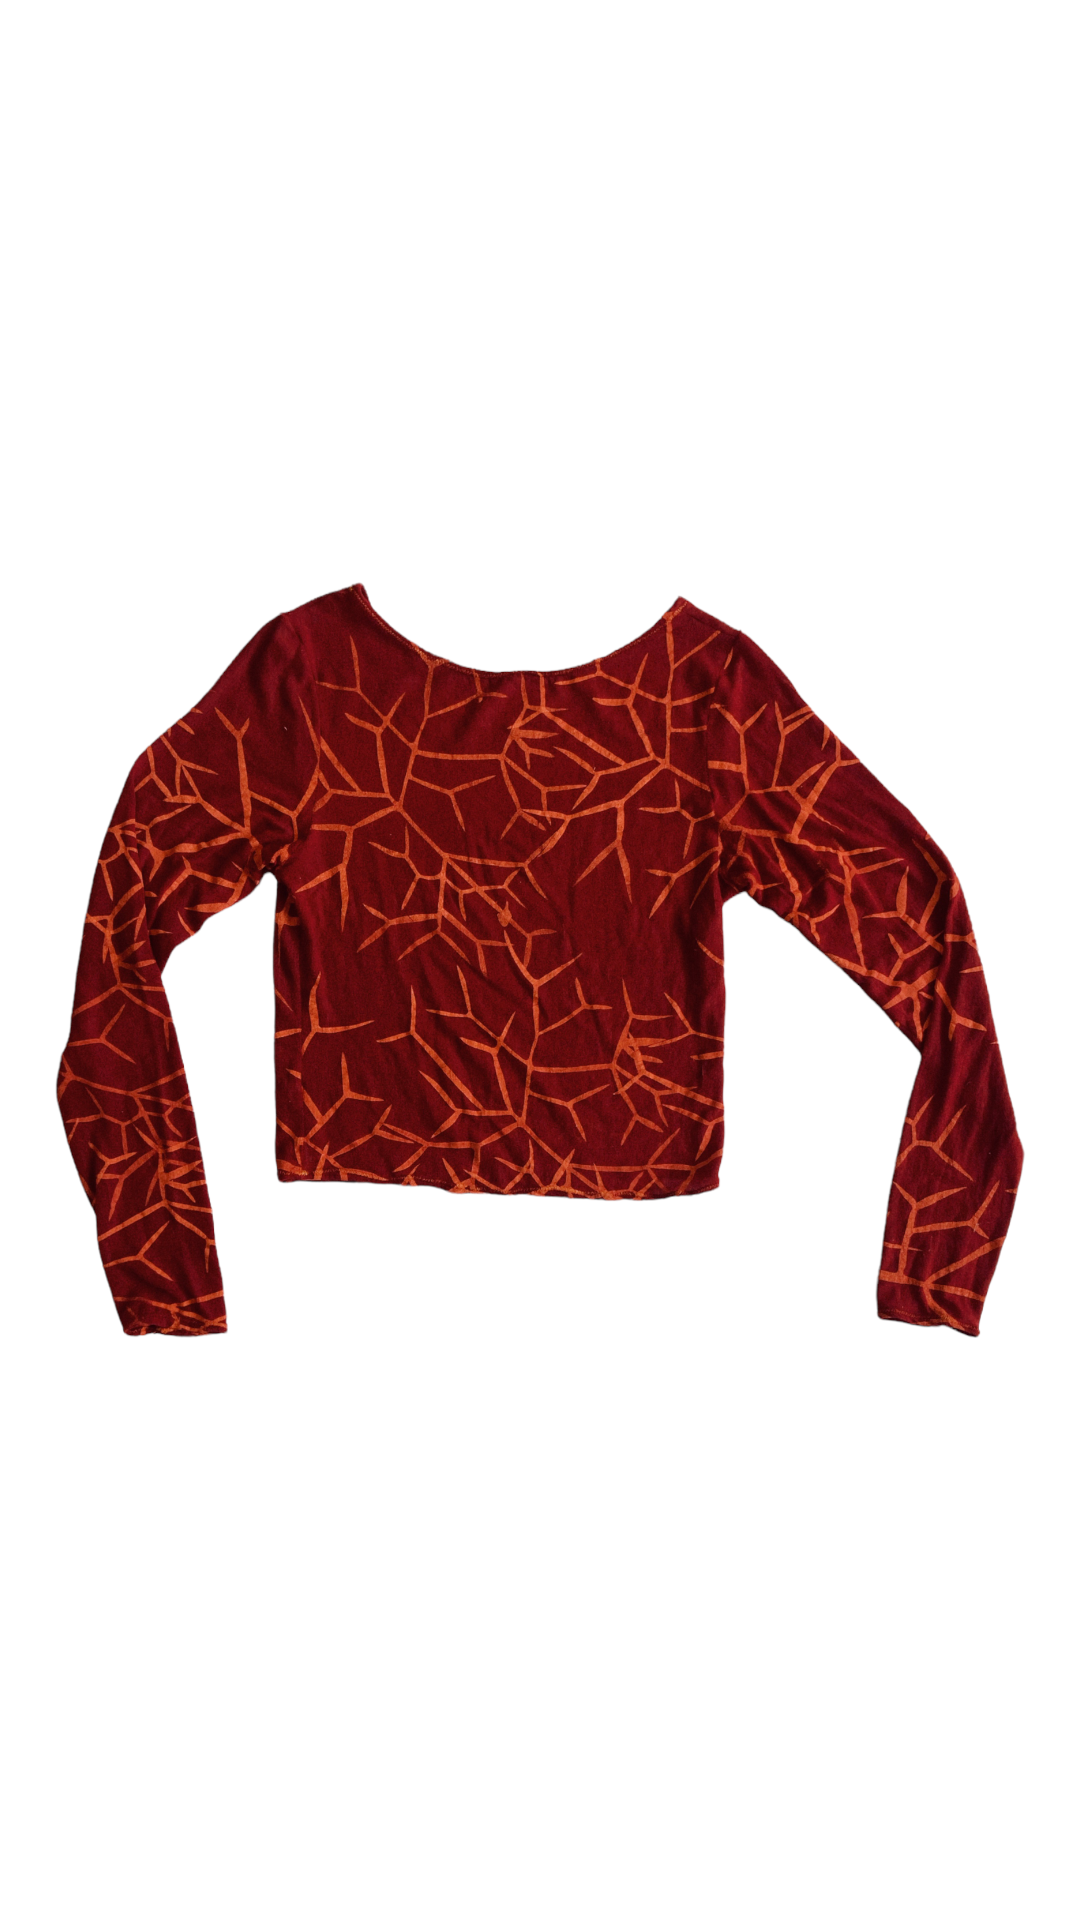 Product shot of the Mona Cordes long sleeve, red, printed, jersey top. The print has bright orange abstract lines that resemble tree roots.